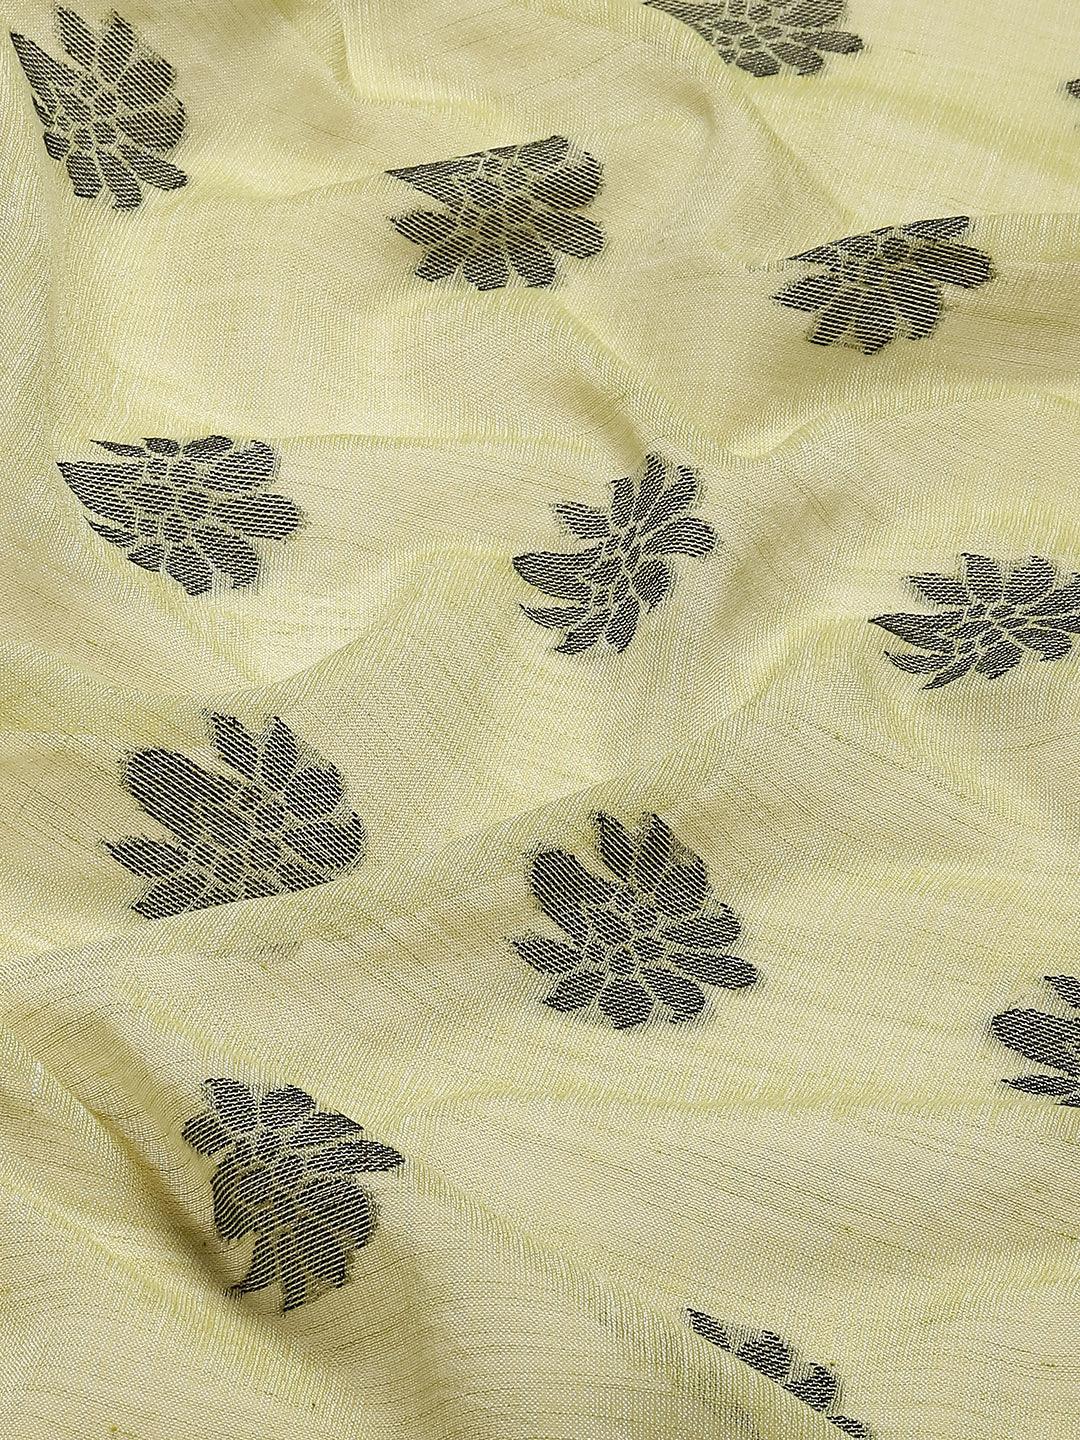 Gorgeous Woven Printed Cotton Linen Saree In Yellow - Indiakreations